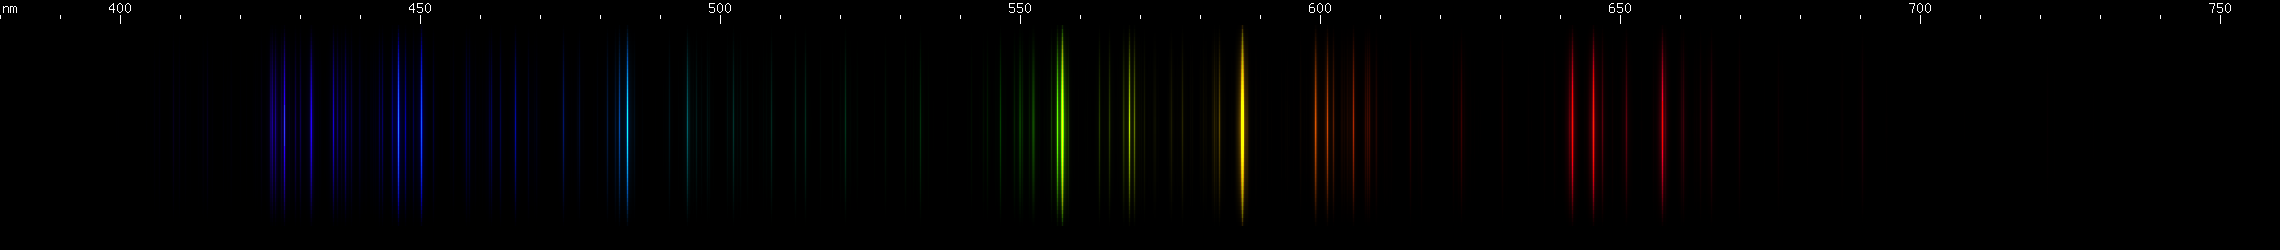 Spectral Lines of Krypton